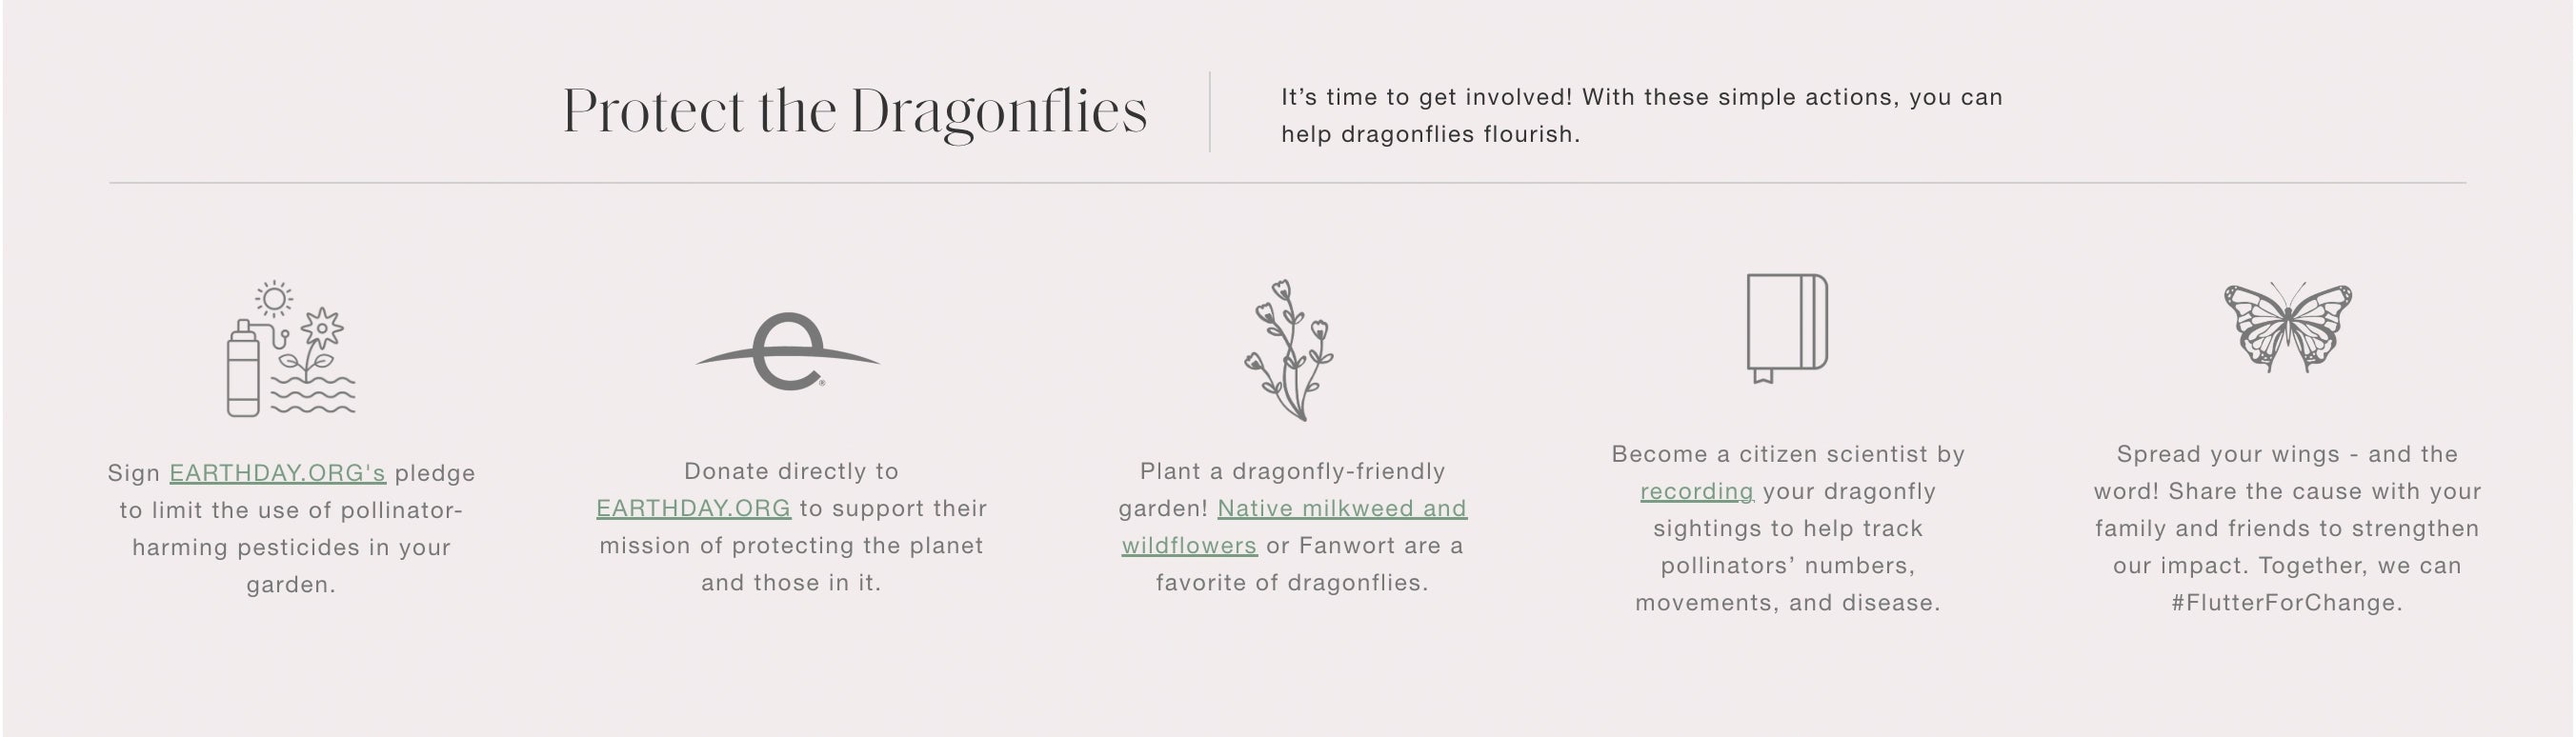 Protect the dragonflies